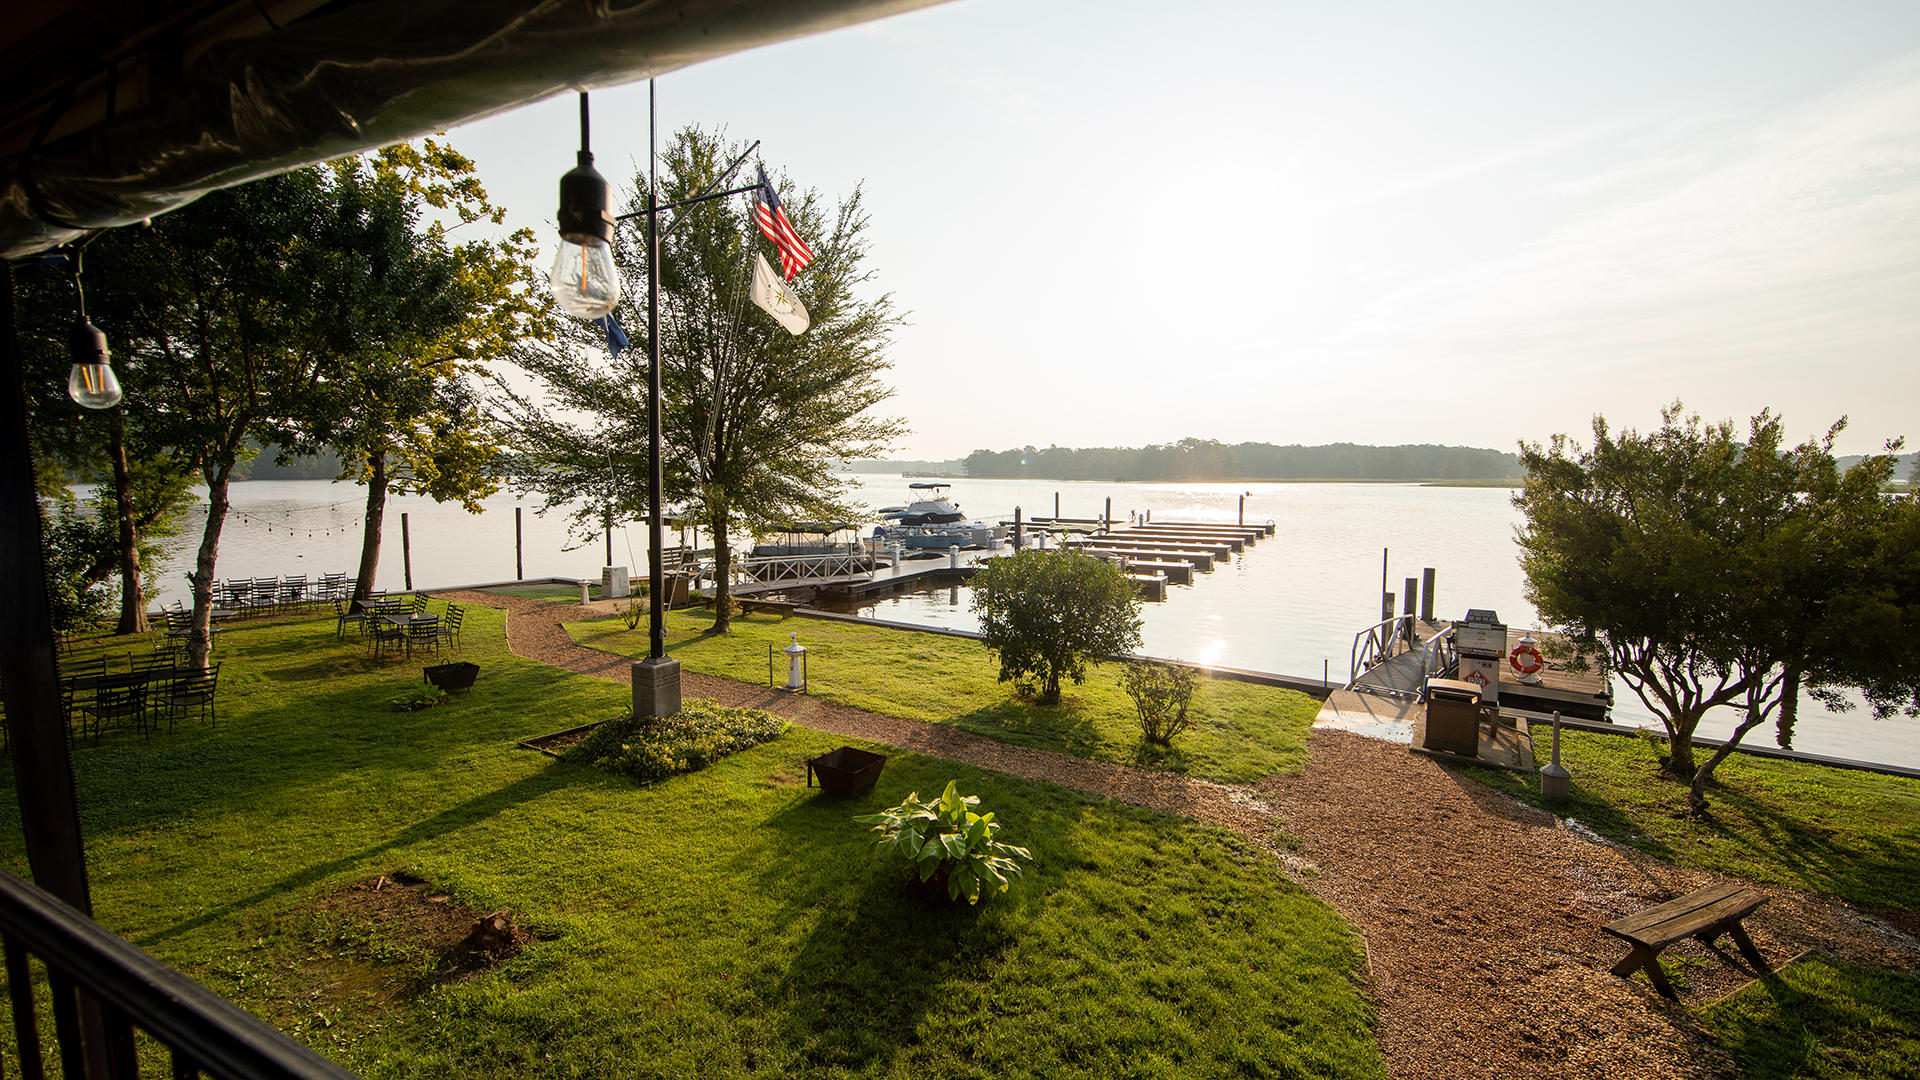 River's Rest Marina & Resort is located on the Chickahominy River in Charles City, VA.